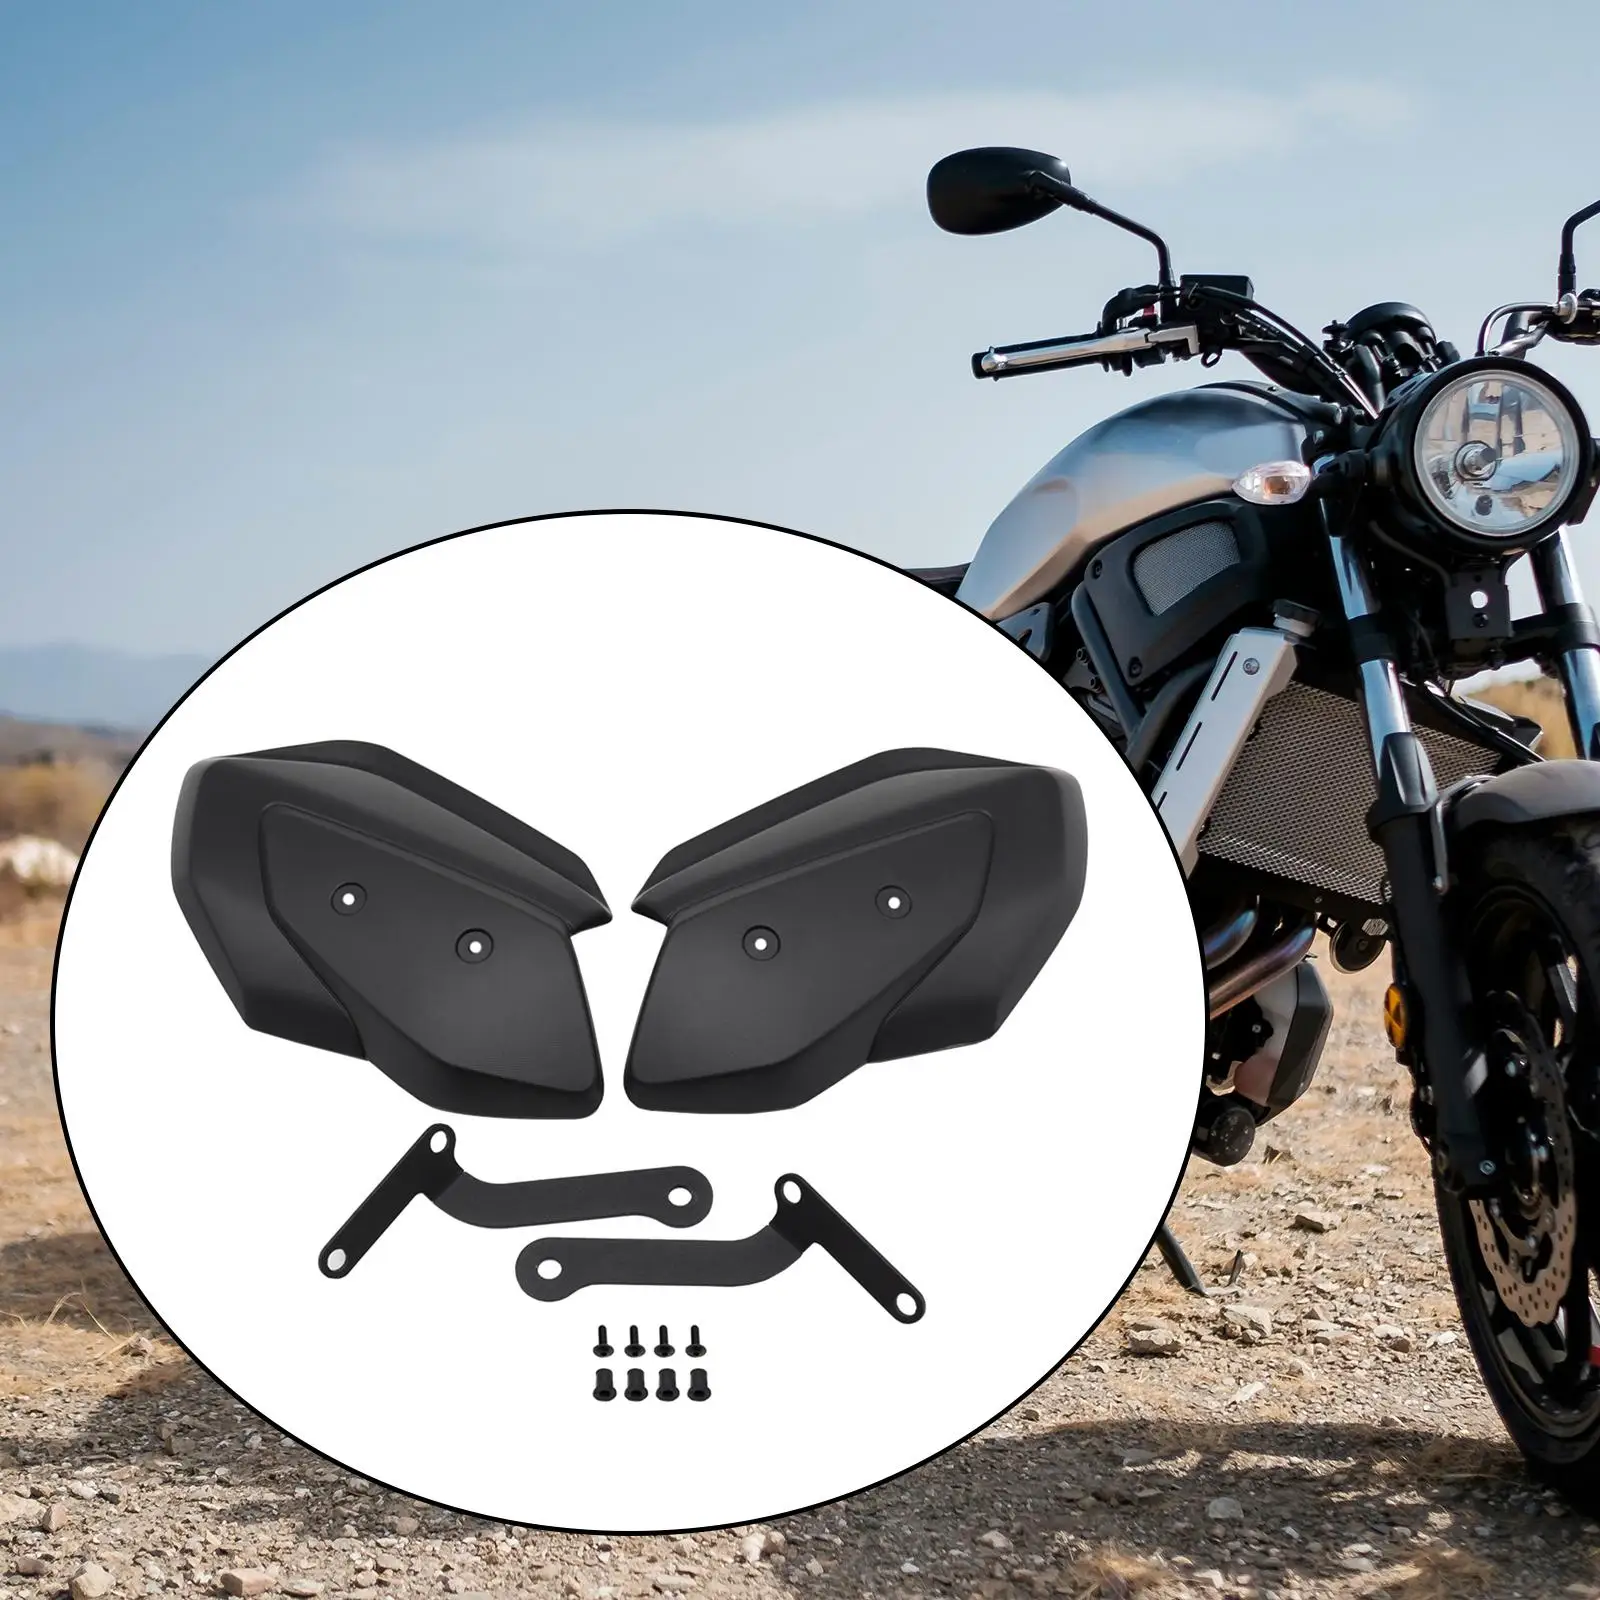 2 Pieces Motorcycle Handguards Motorcycle Hand for Xmax 300 Durable